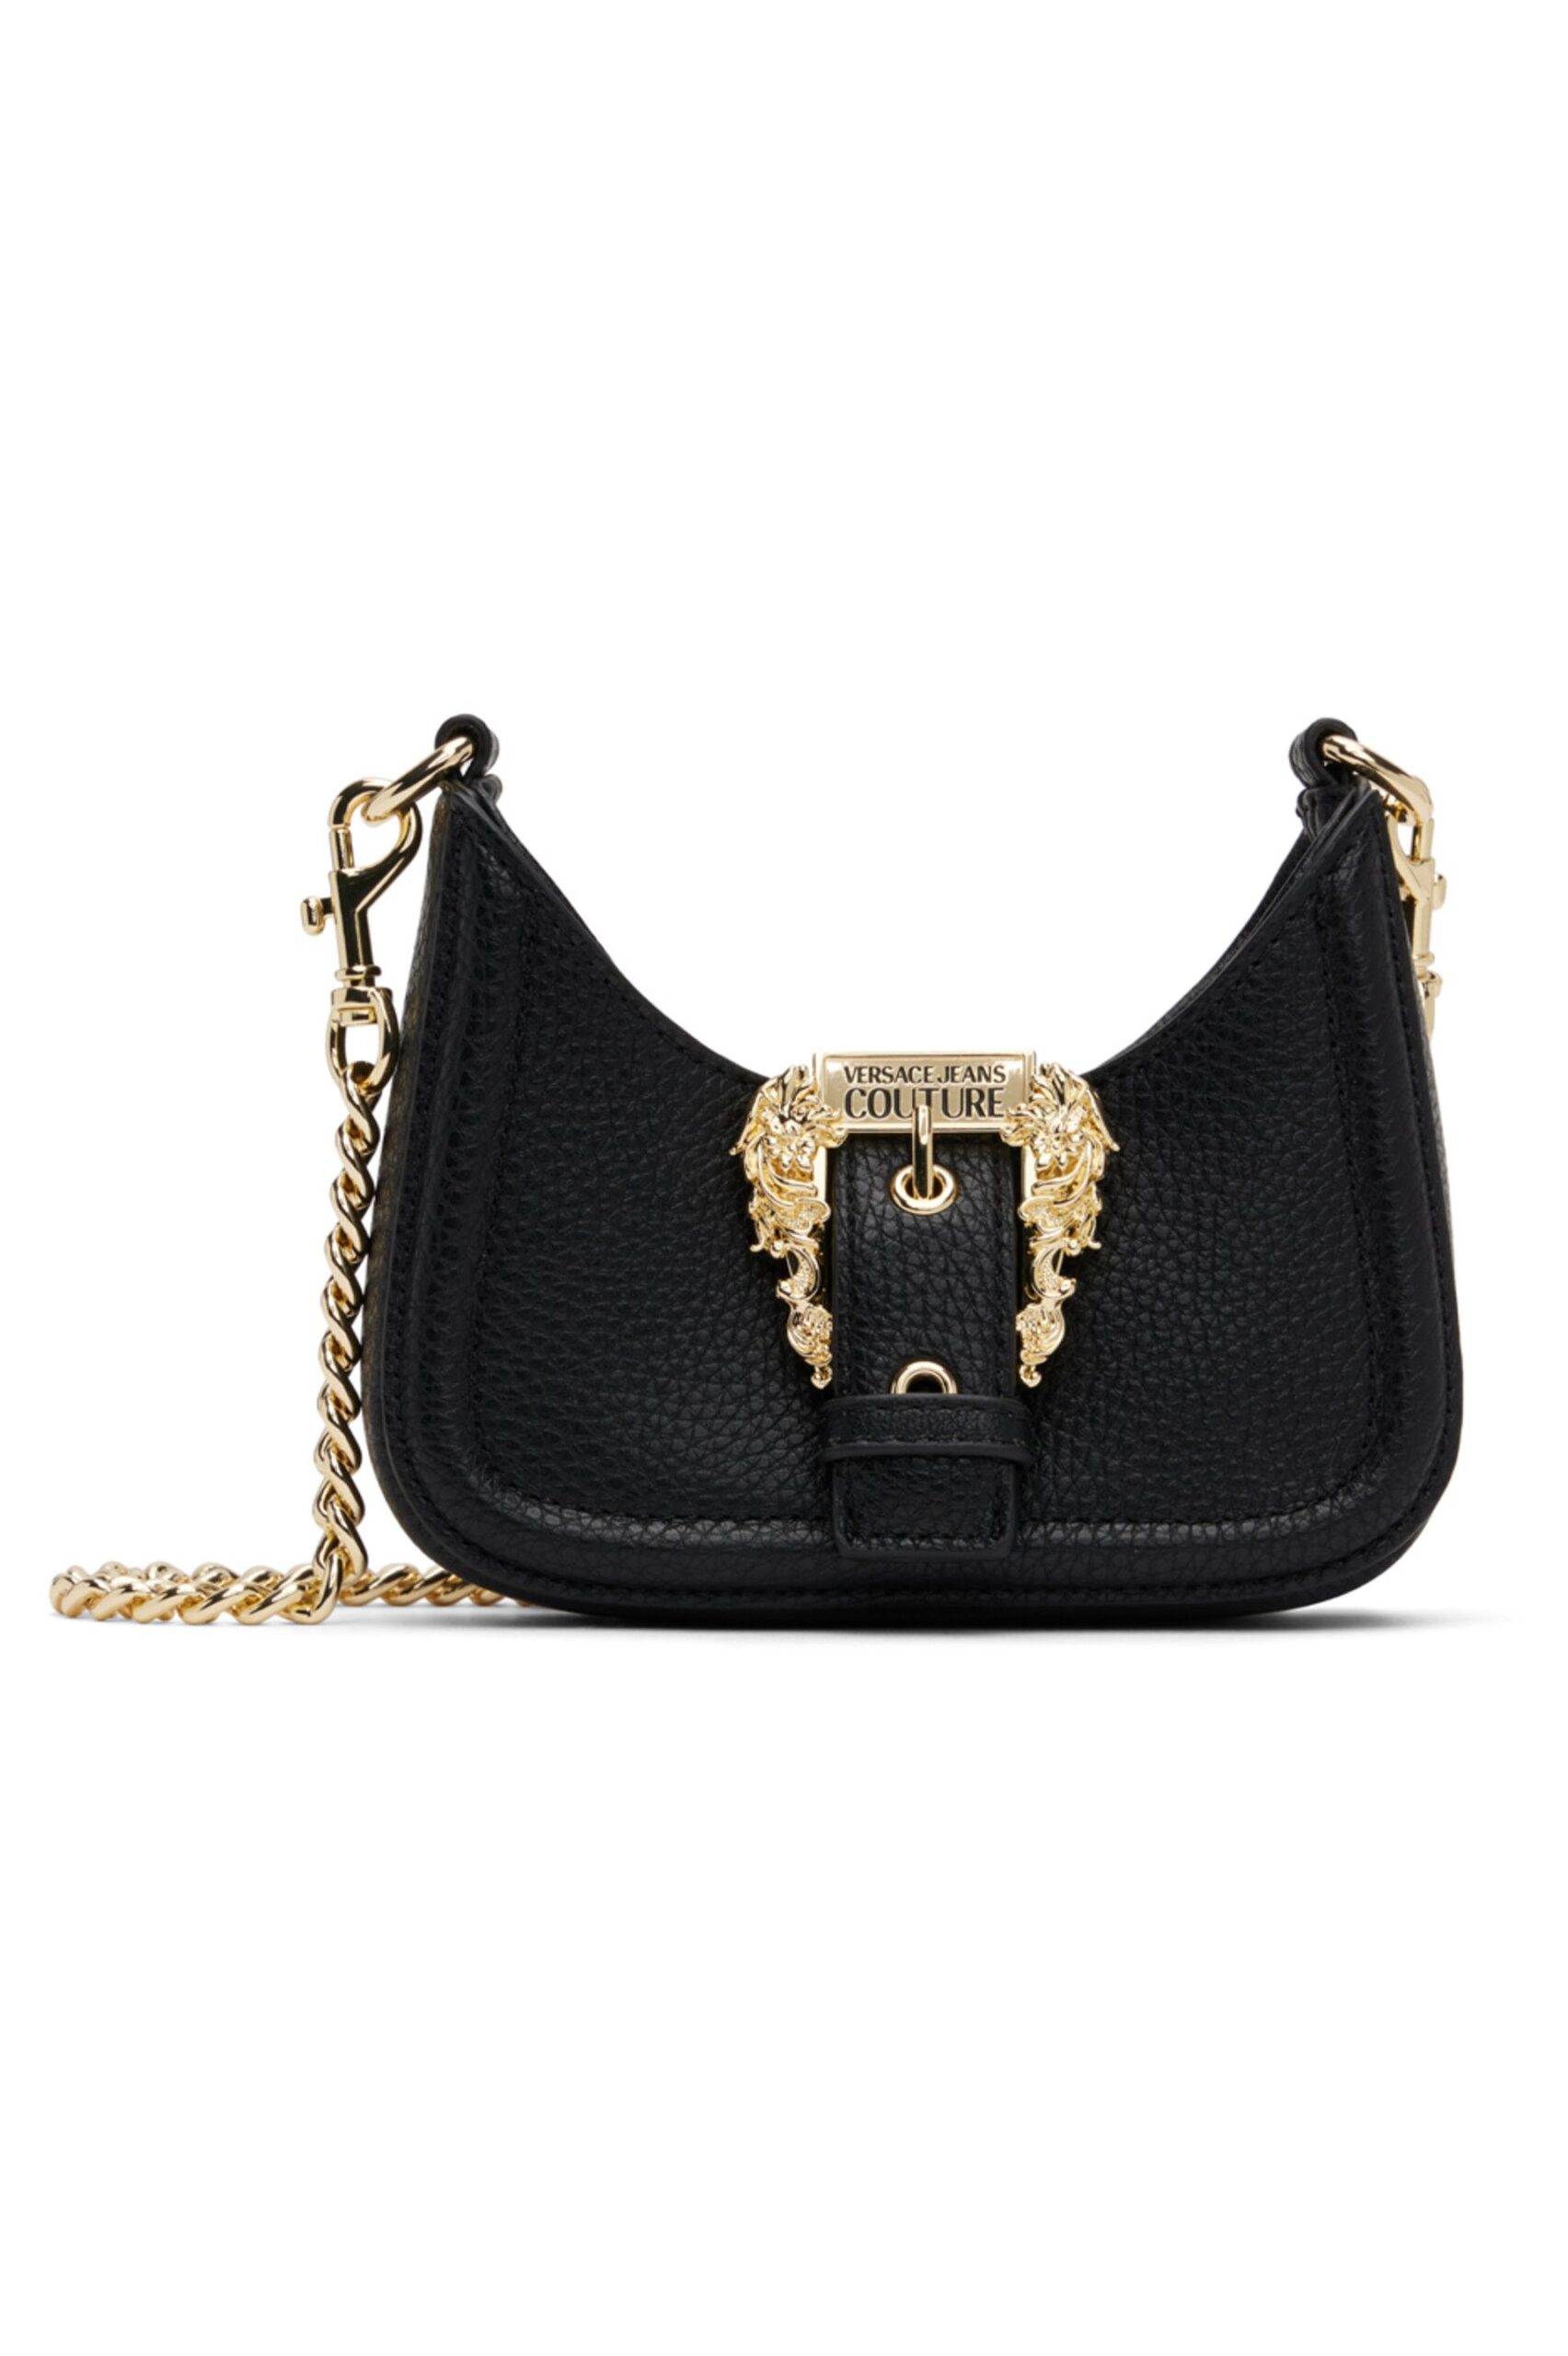 Accessorize in Luxury: Versace Bags for Every Occasion